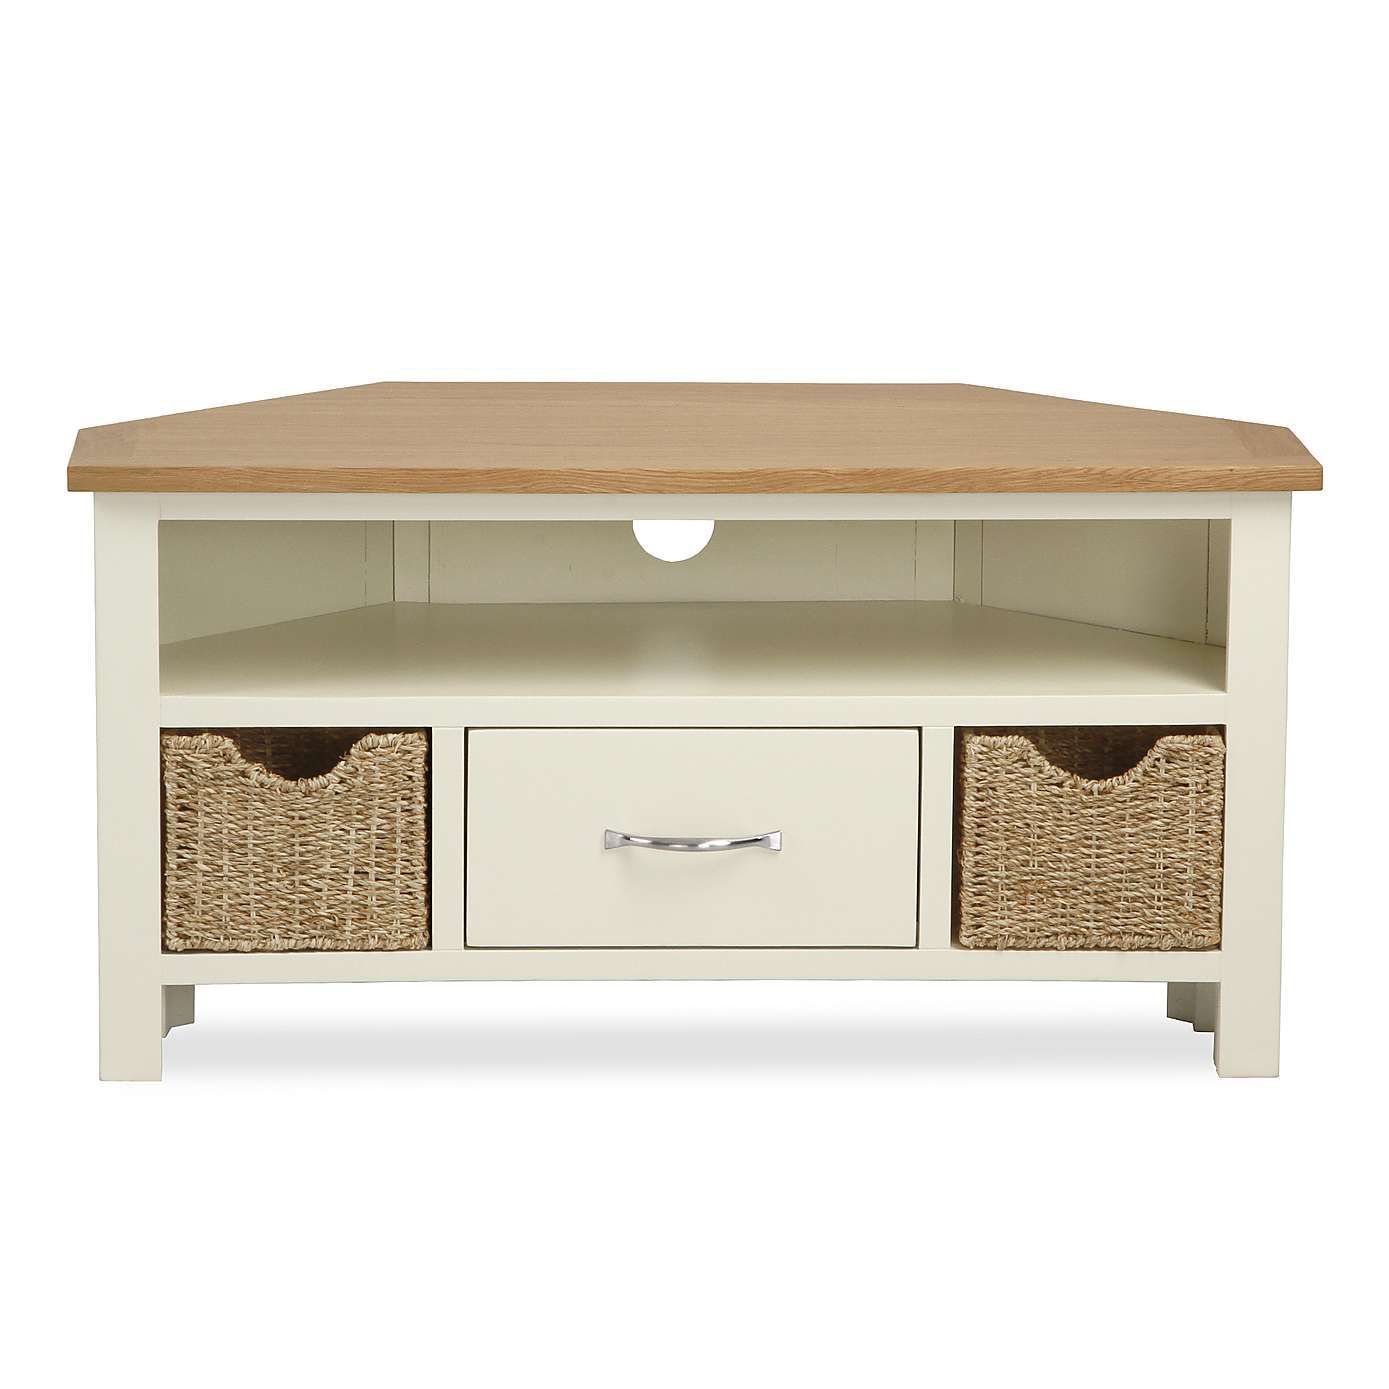 Sidmouth Cream Corner Tv Stand | Dunelm | Corner Tv Stand Throughout Cream Tv Cabinets (View 4 of 15)